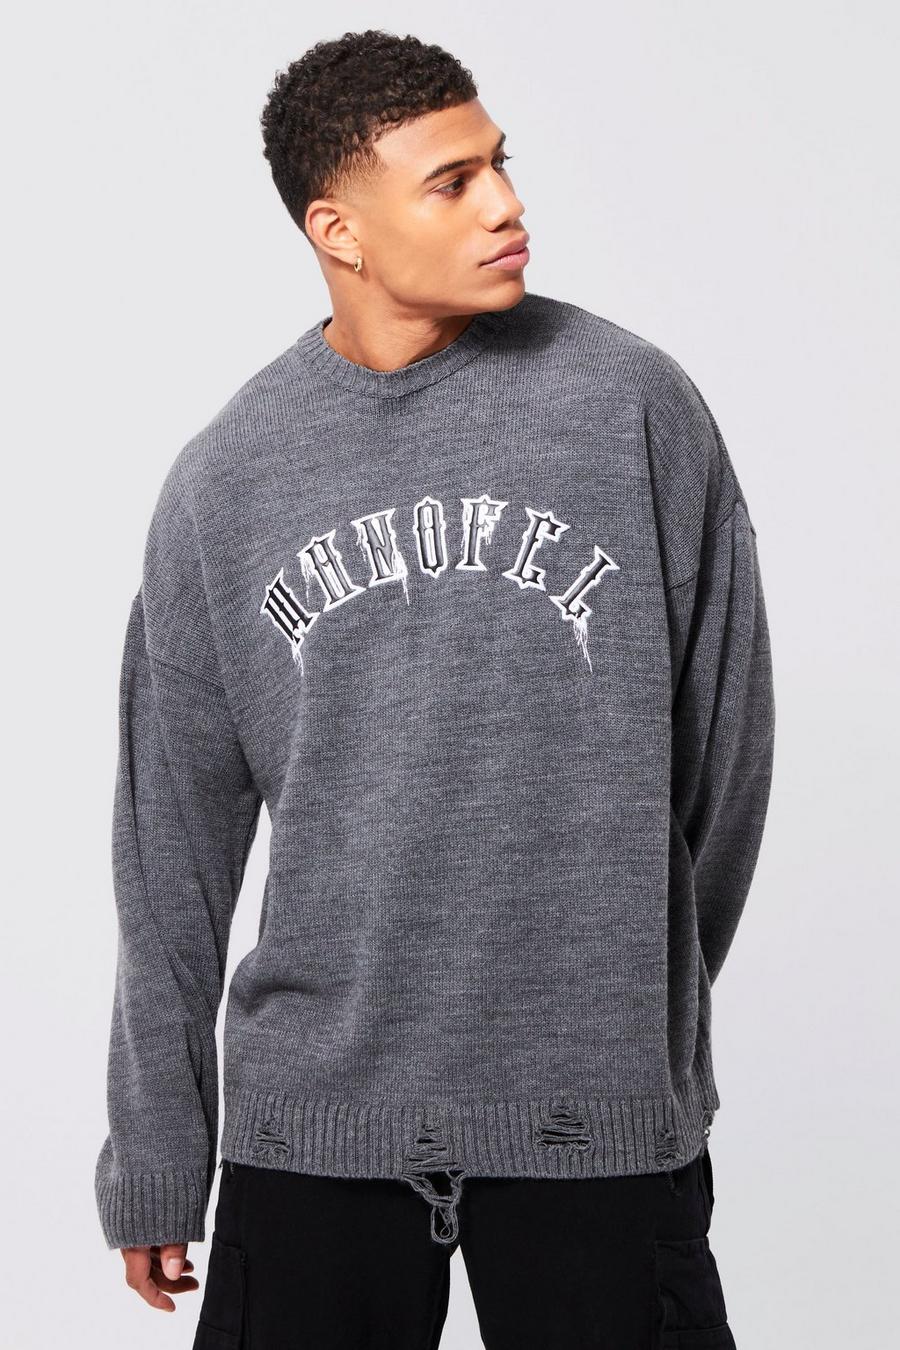 PU Man Official Strickpullover, Charcoal gris